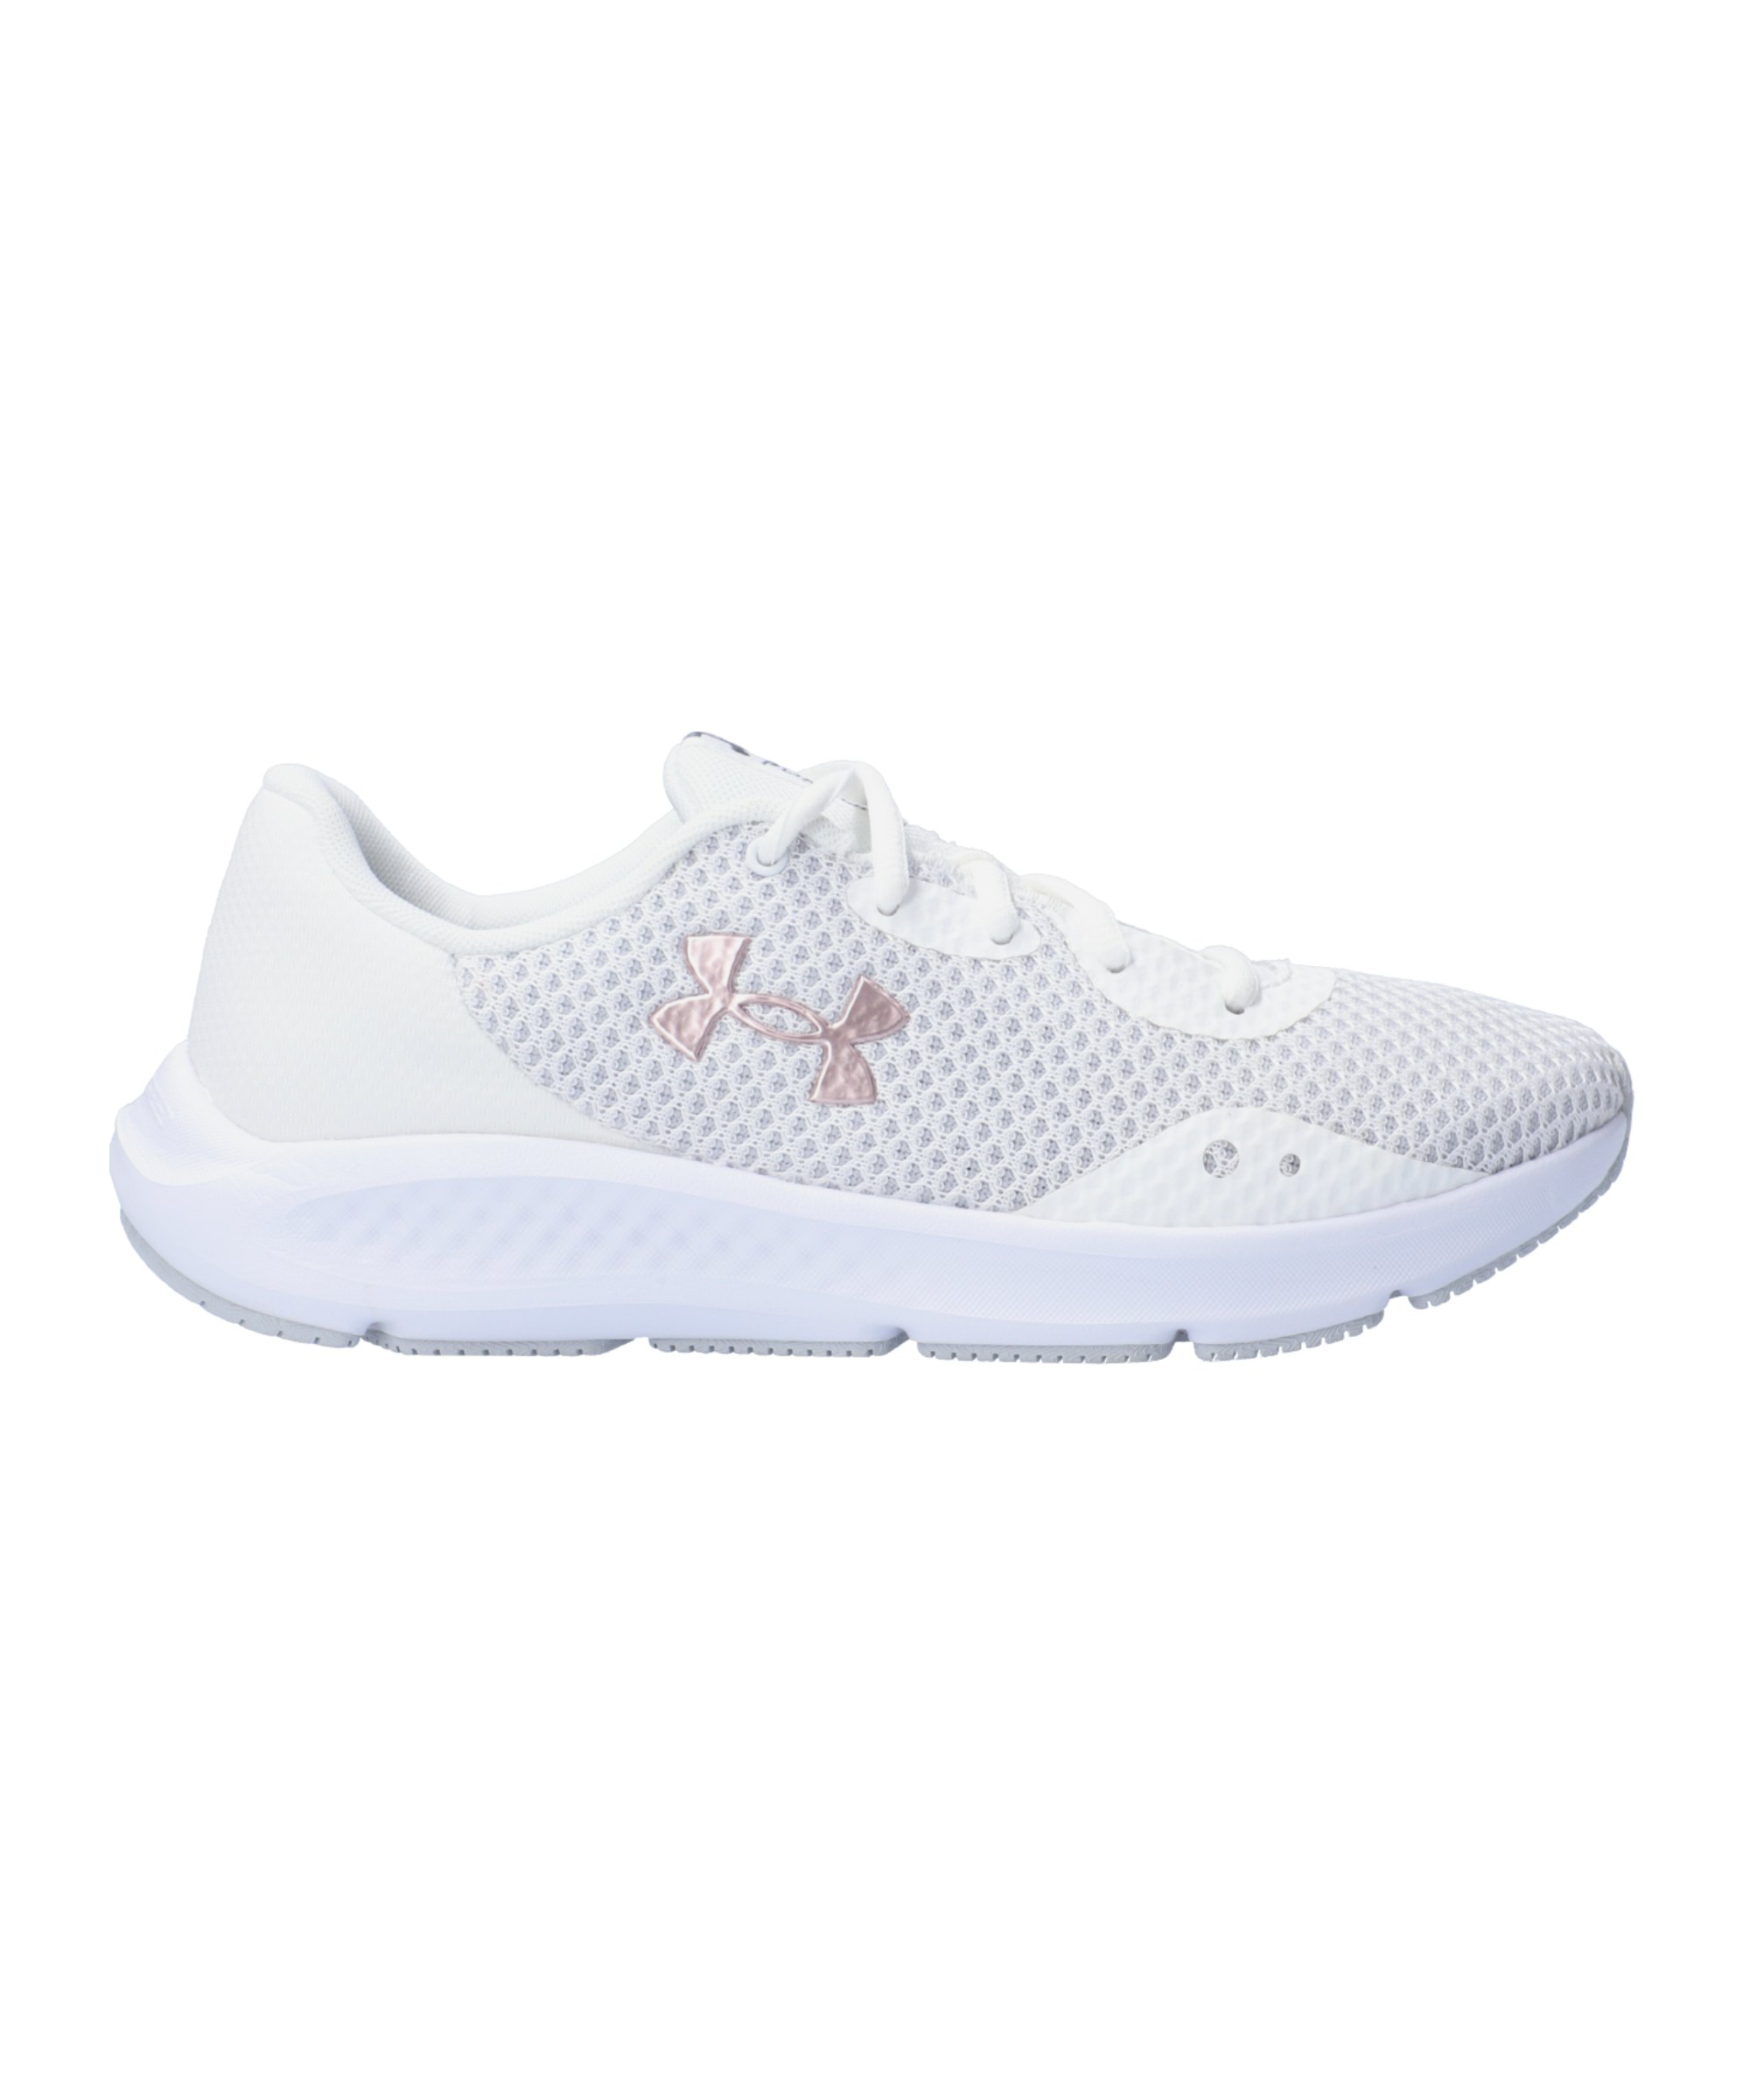 Under Armour Charged Pursuit 3 Running Damen F101 - weiss